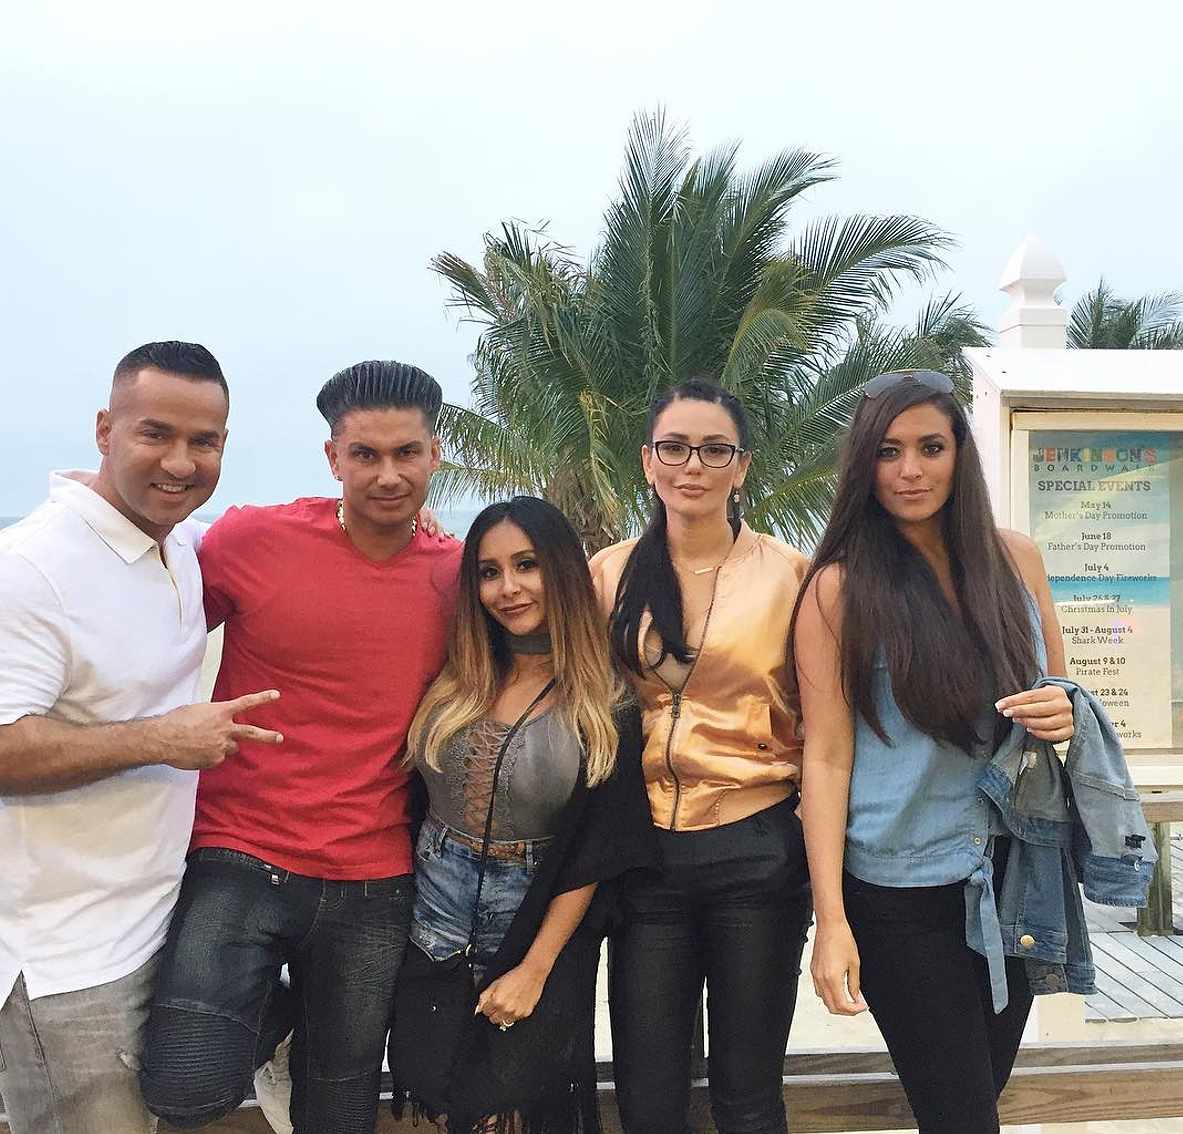 watch reunion road trip return to the jersey shore